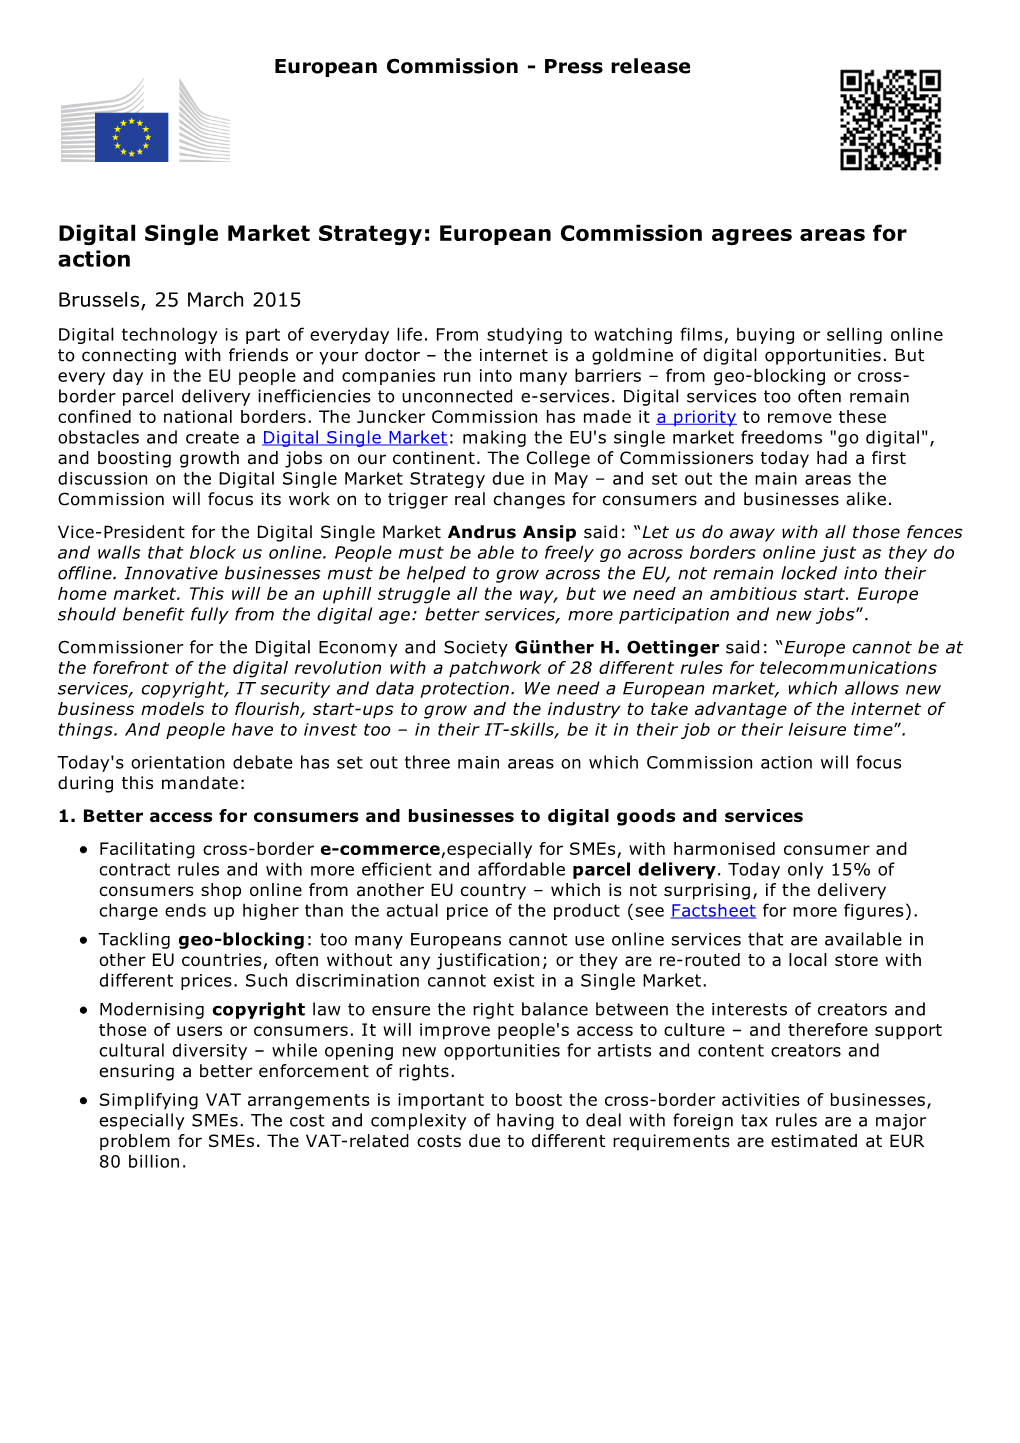 Digital Single Market Strategy: European Commission Agrees Areas for Action Brussels, 25 March 2015 Digital Technology Is Part of Everyday Life